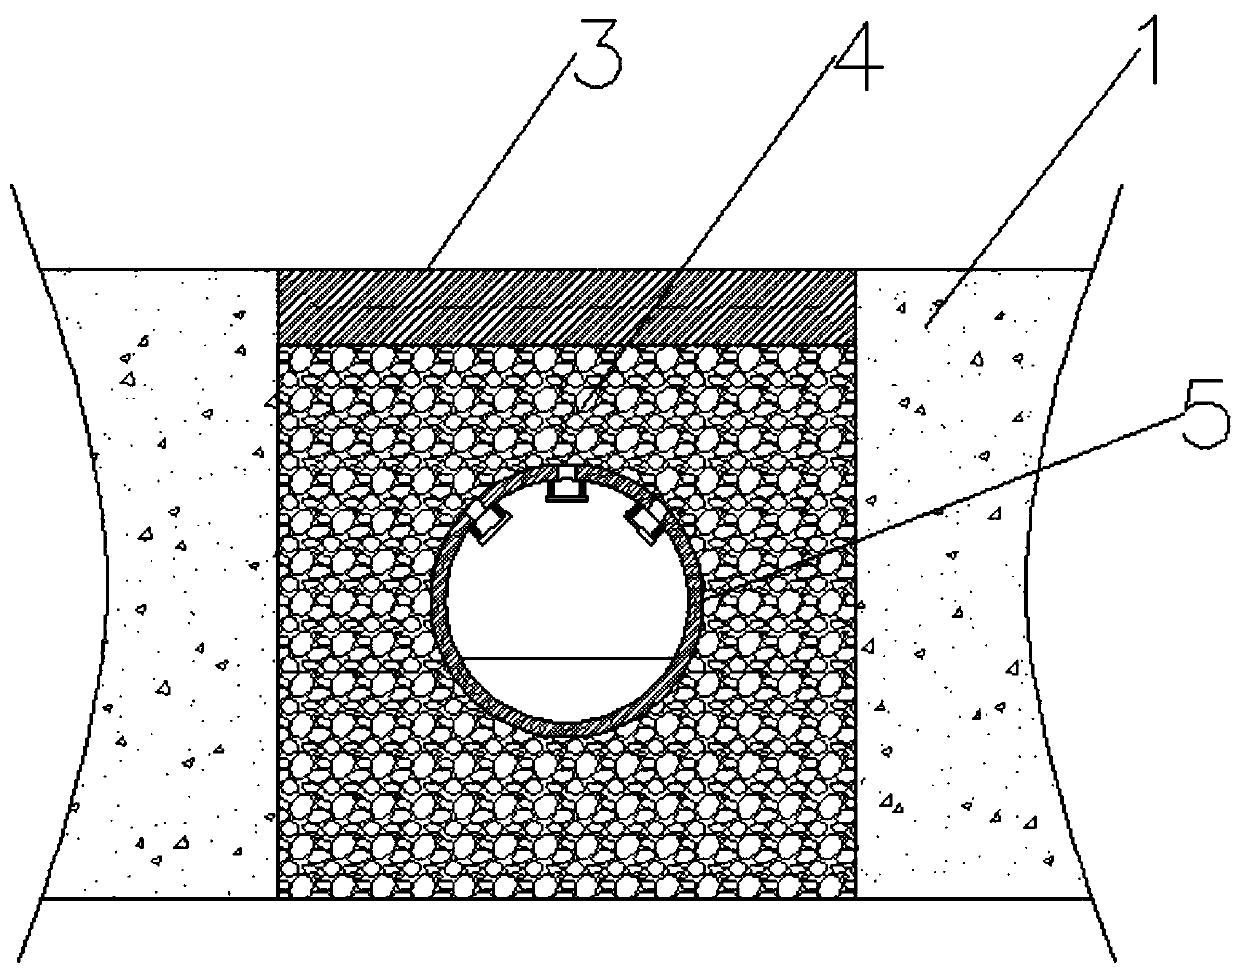 Underdrain structure modified through concrete pavement and construction method of underdrain structure